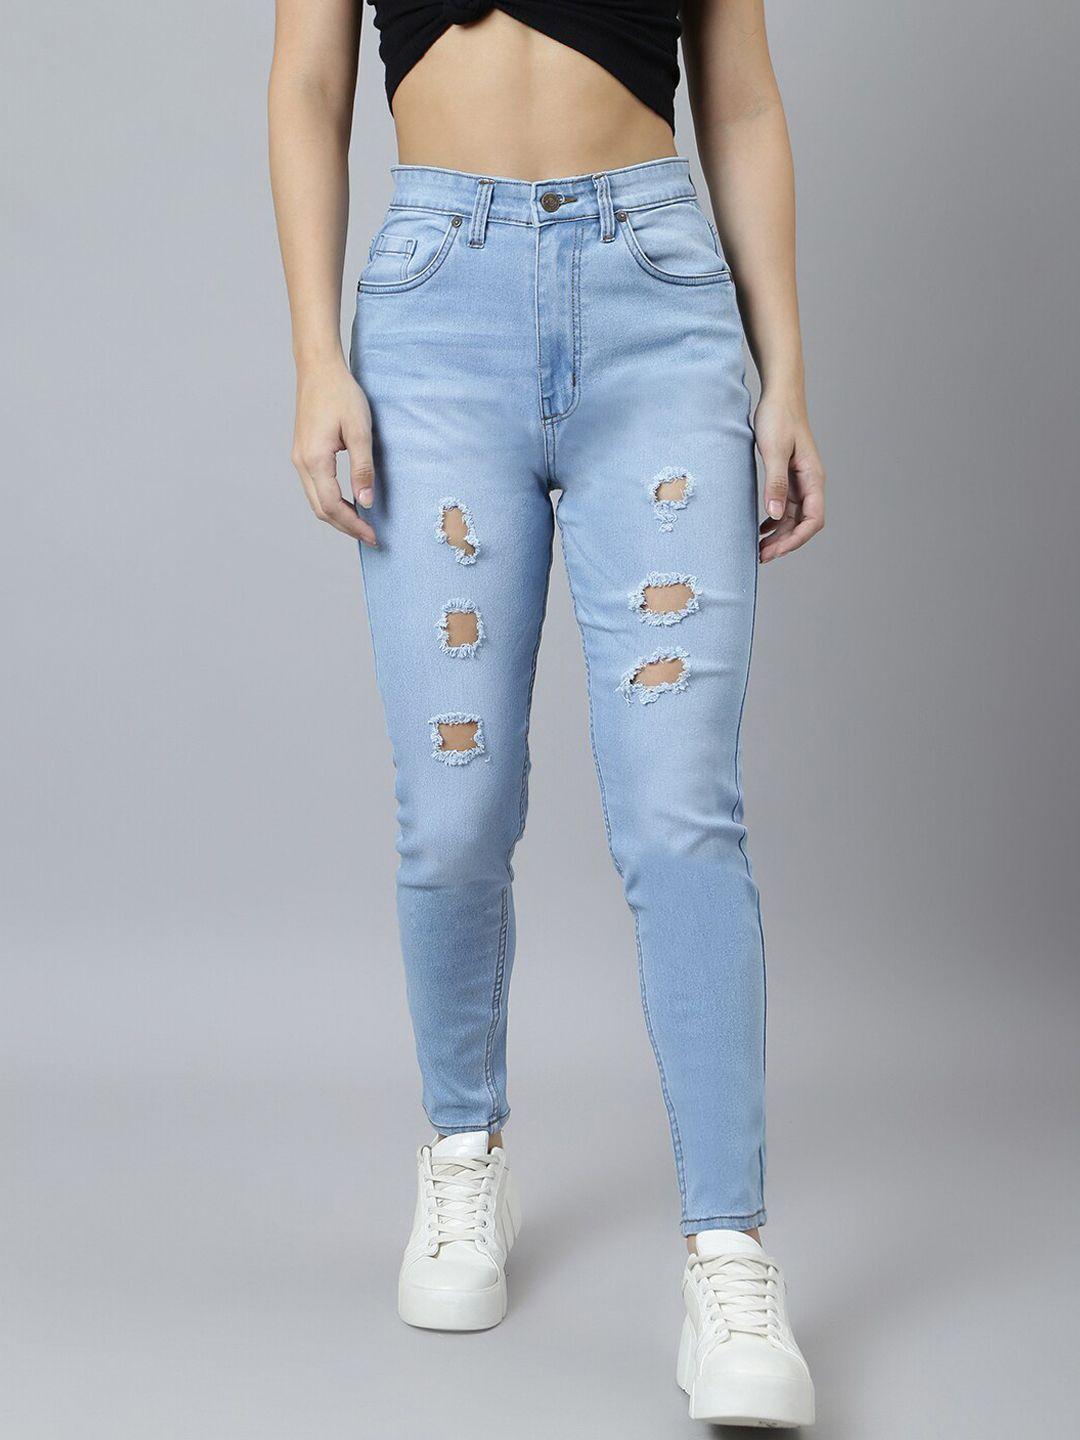 baesd-women-skinny-fit-high-rise-mildly-distressed-stretchable-cotton-jeans